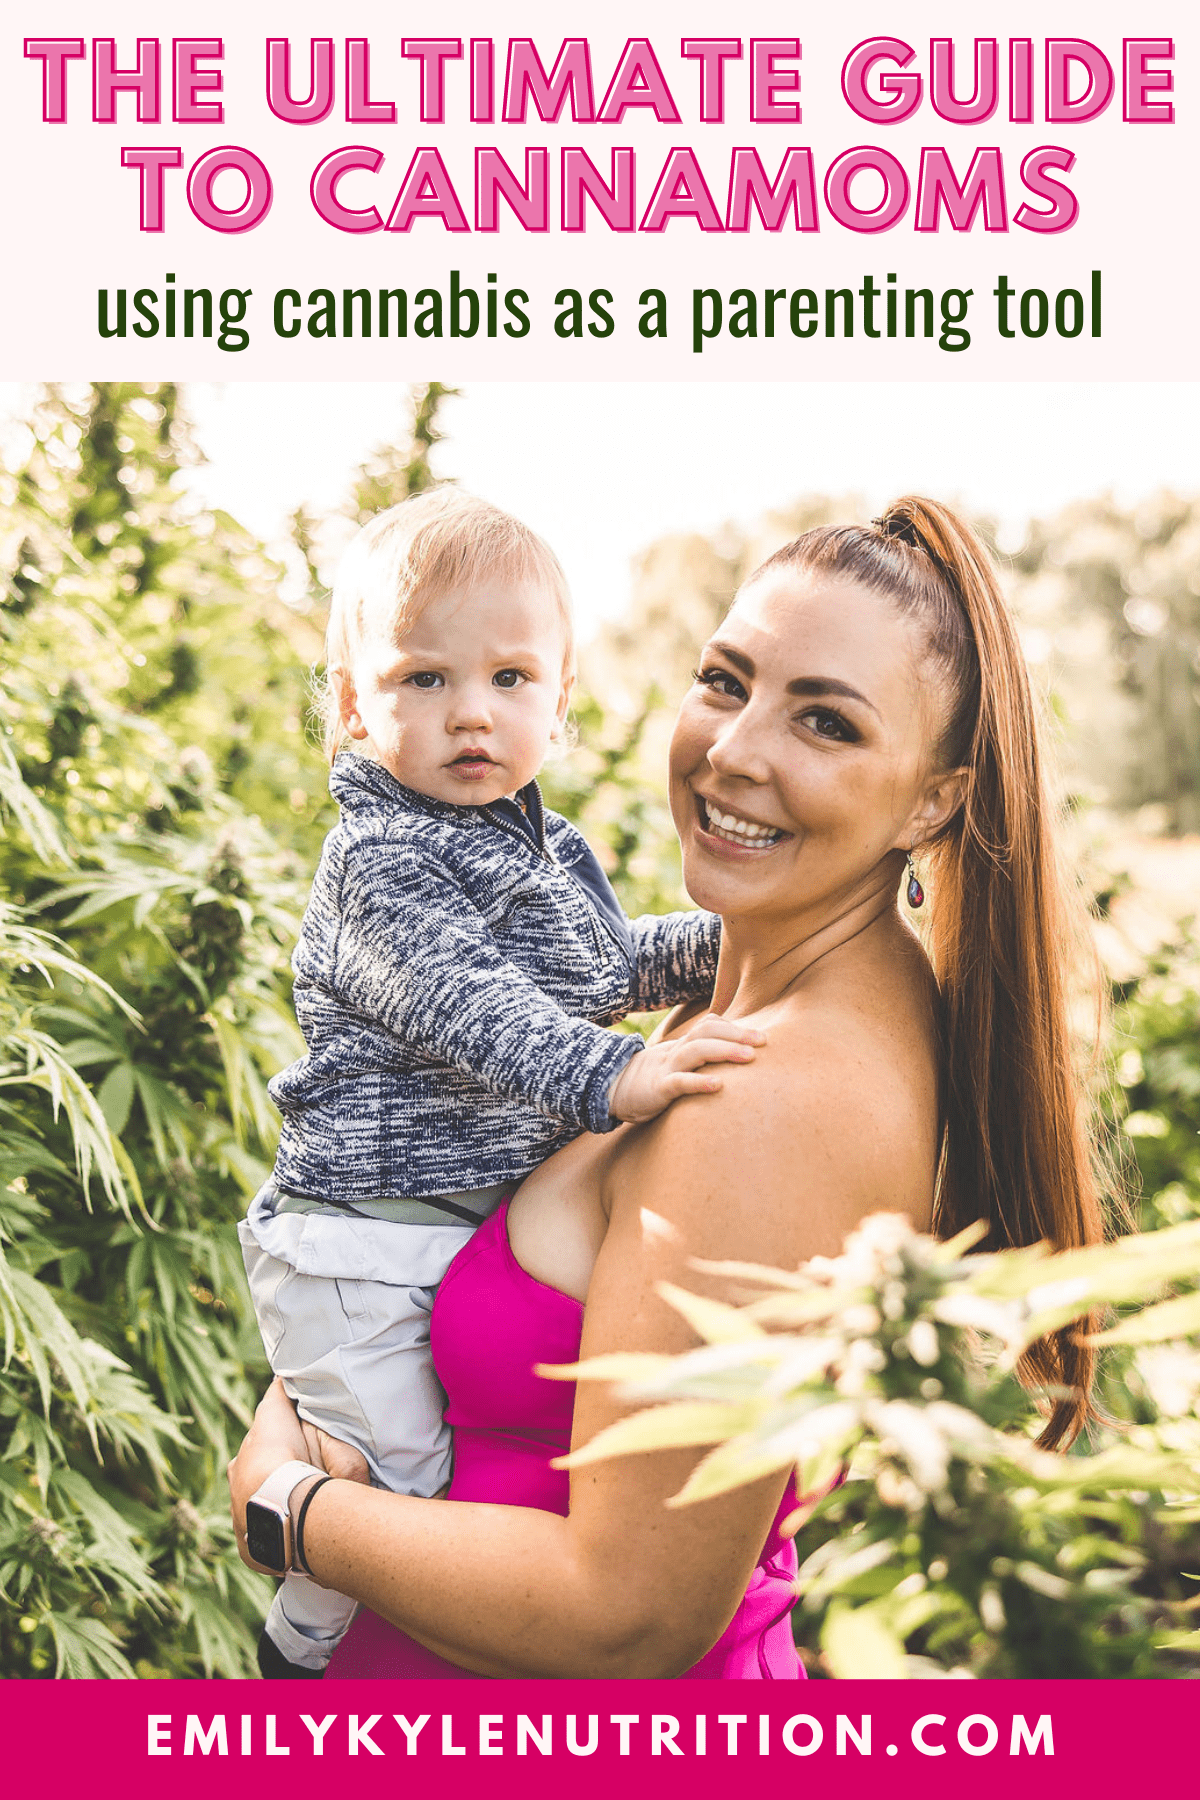 A picture of Emily Kyle and her baby in a cannabis garden with text that says the ultimate guide to canna moms, using cannabis as a parenting tool. 